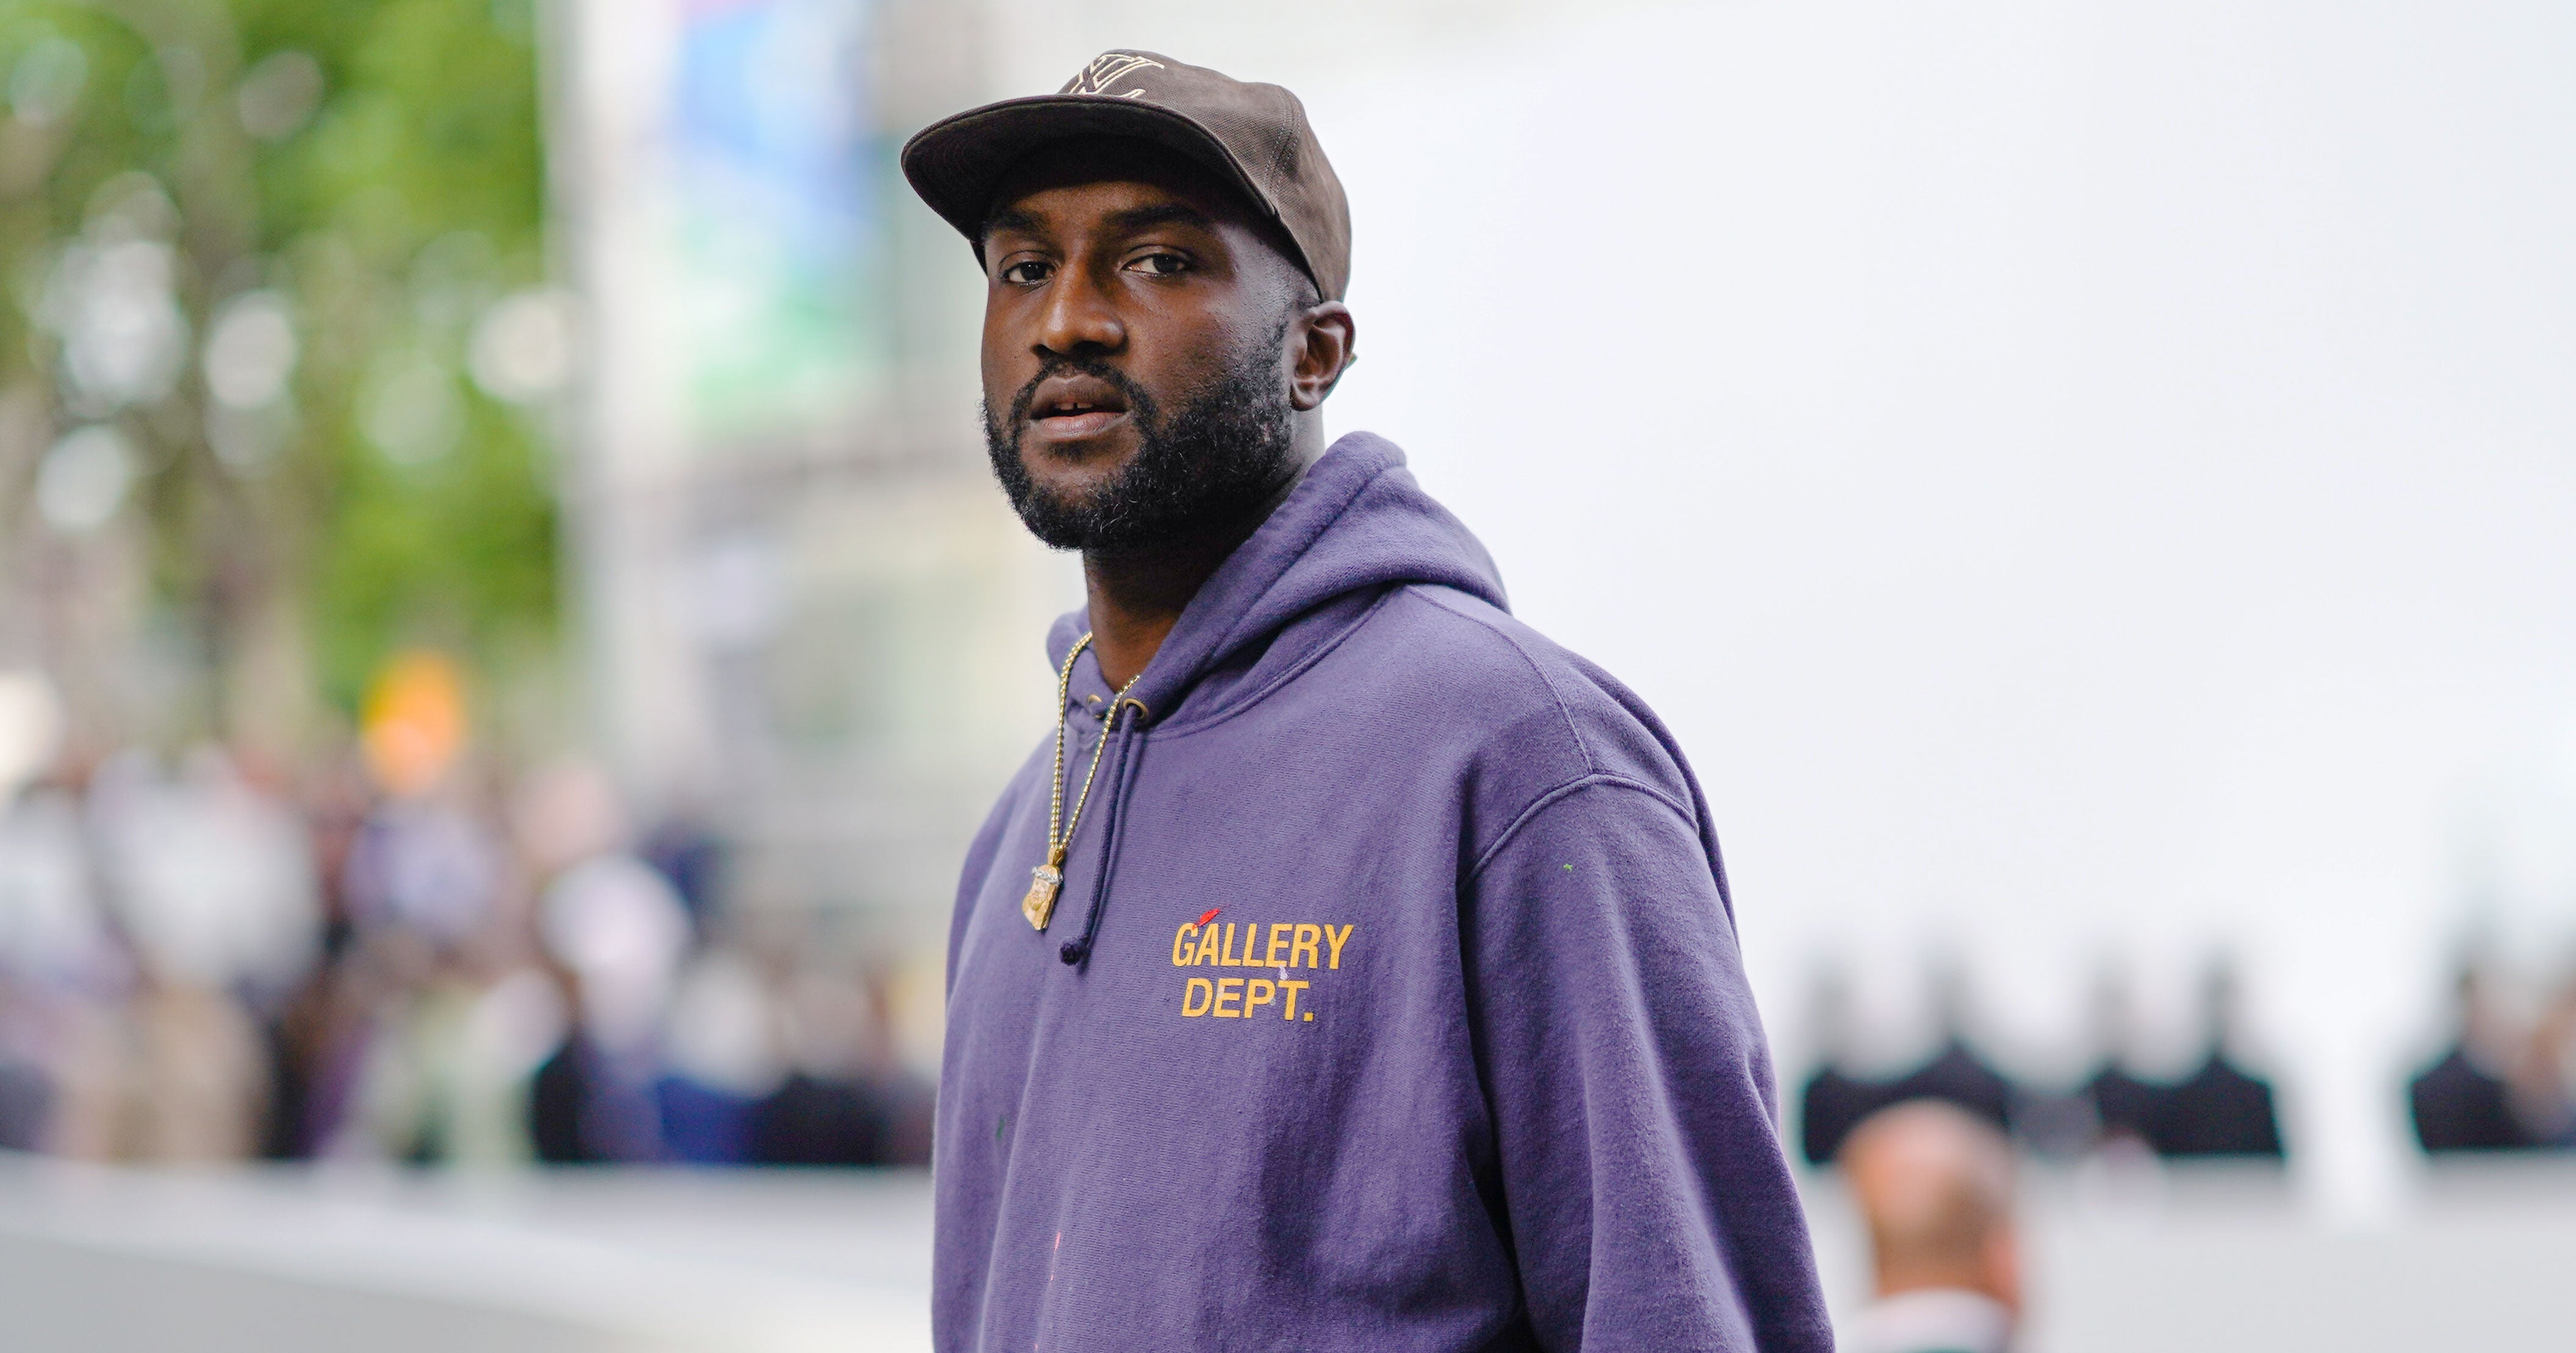 How to Buy Virgil Abloh's Exclusive New Jewelry Collection